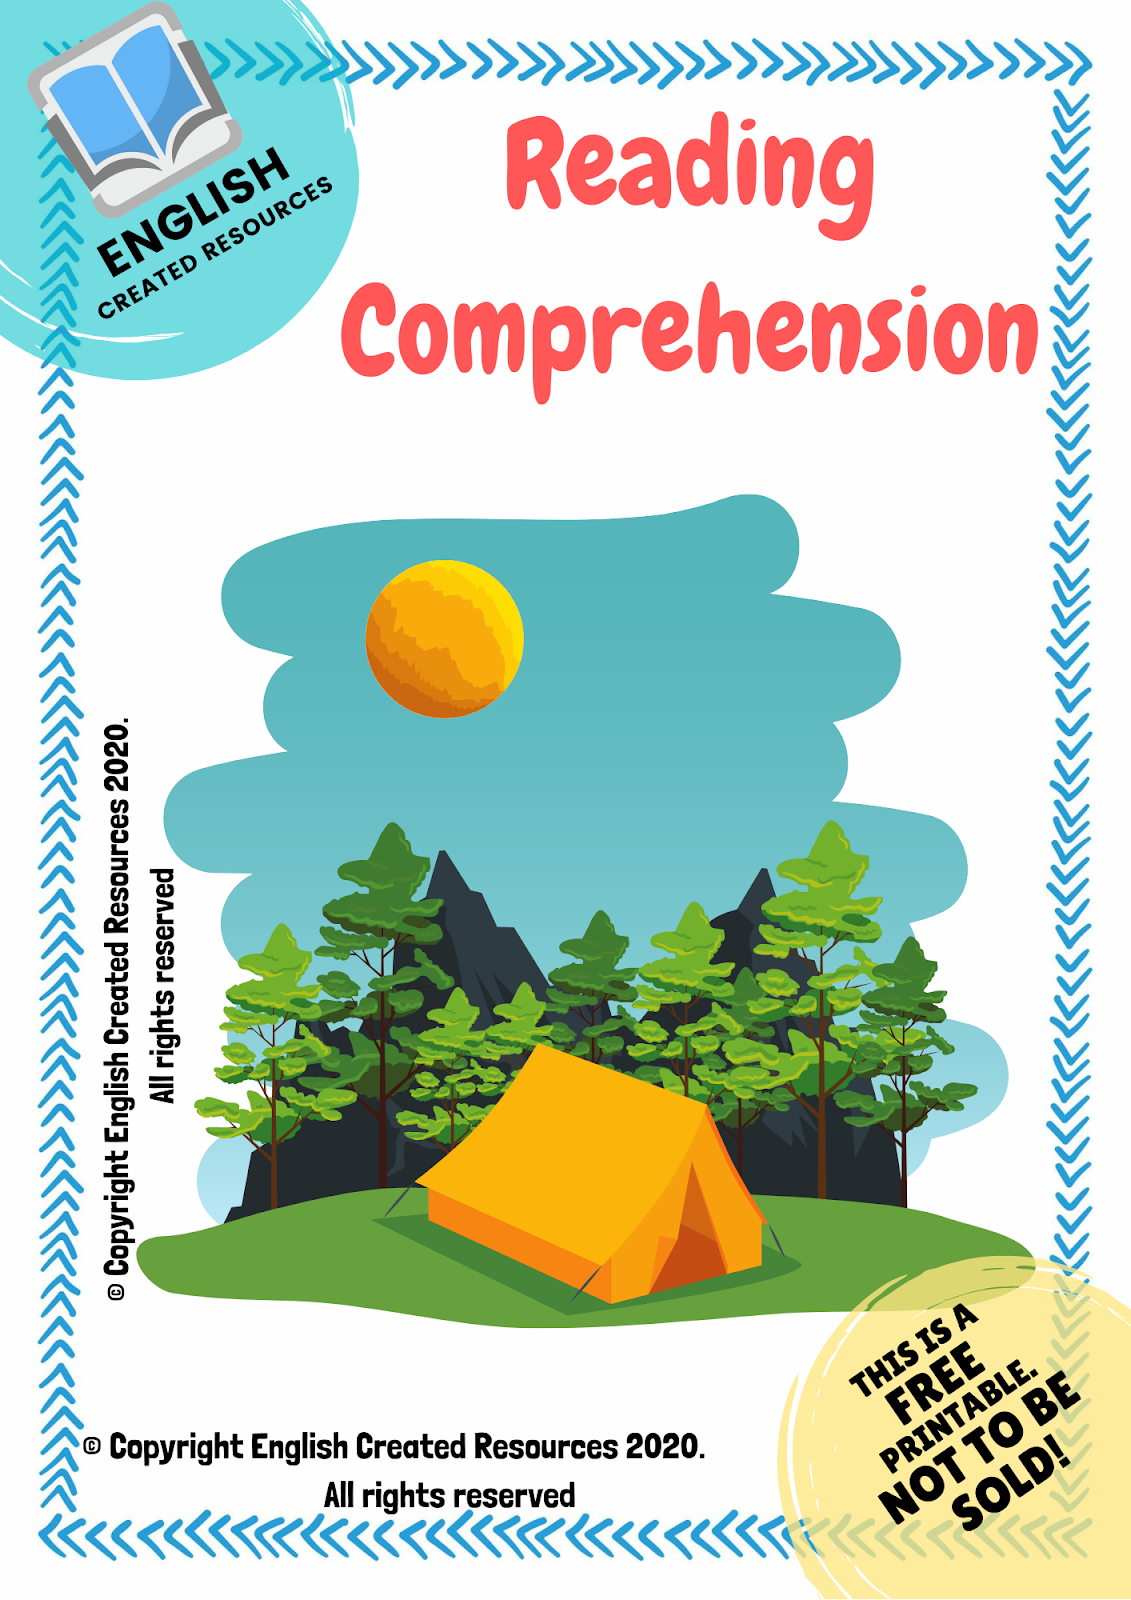 English Comprehension Worksheets For Middle School